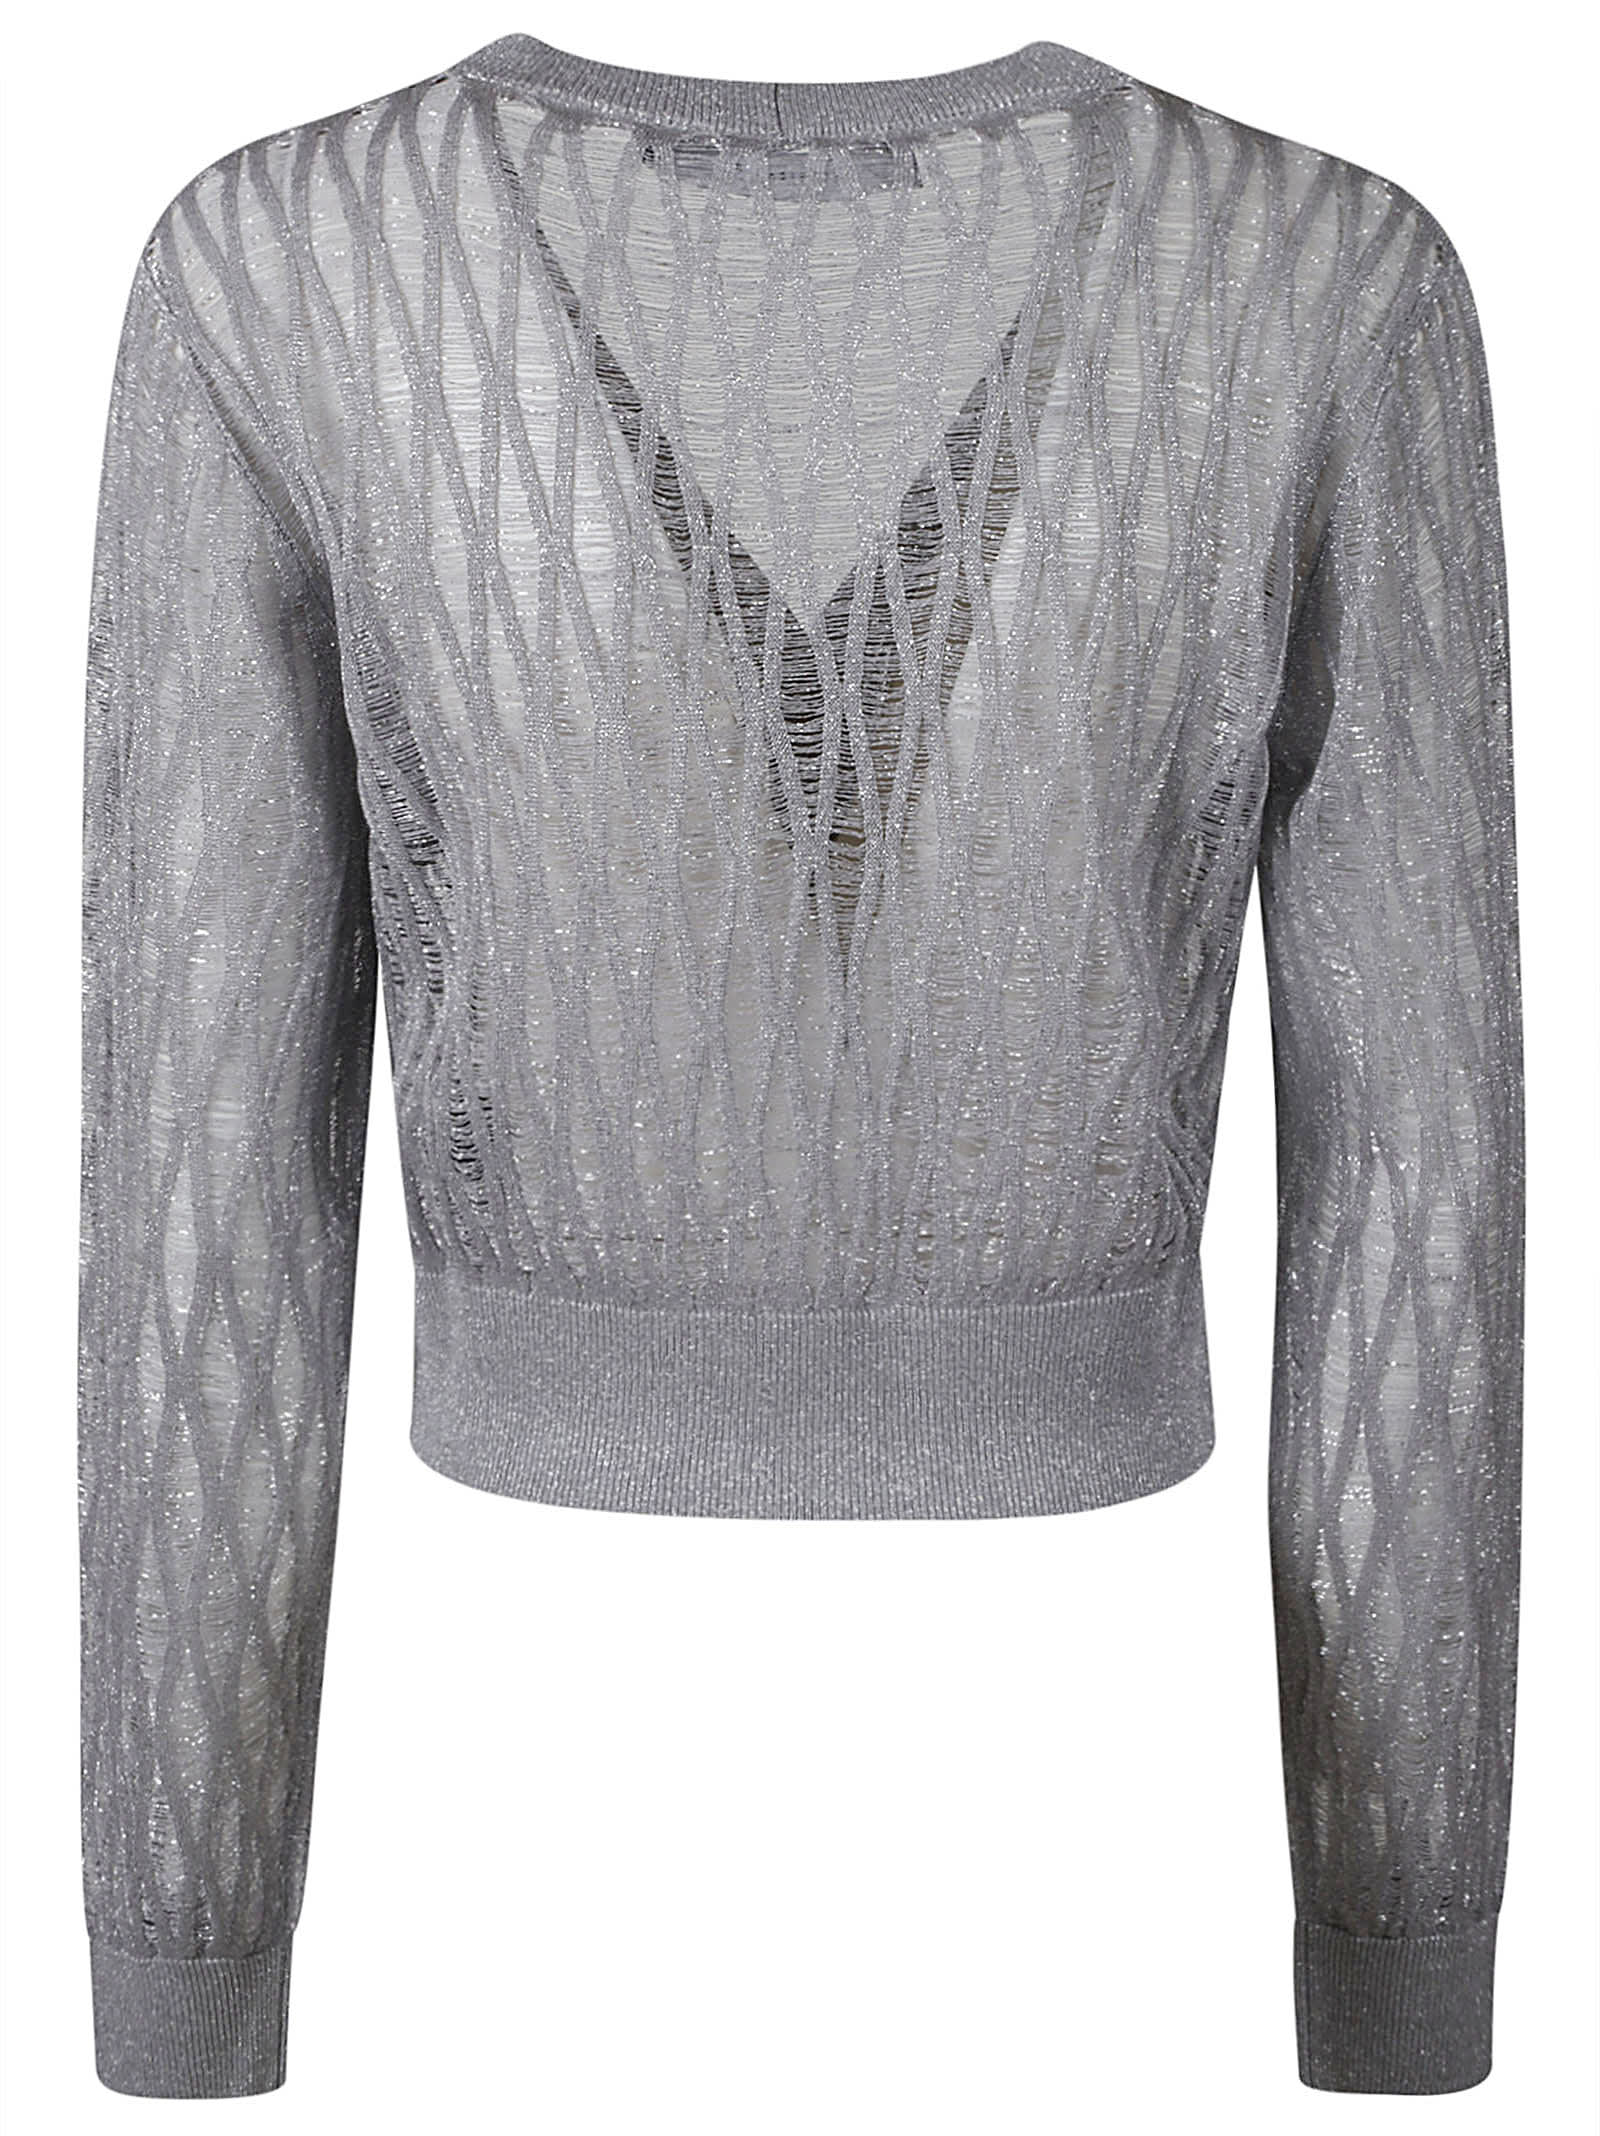 Shop Federica Tosi See-through Diamond Pattern Cropped Cardigan In Silver